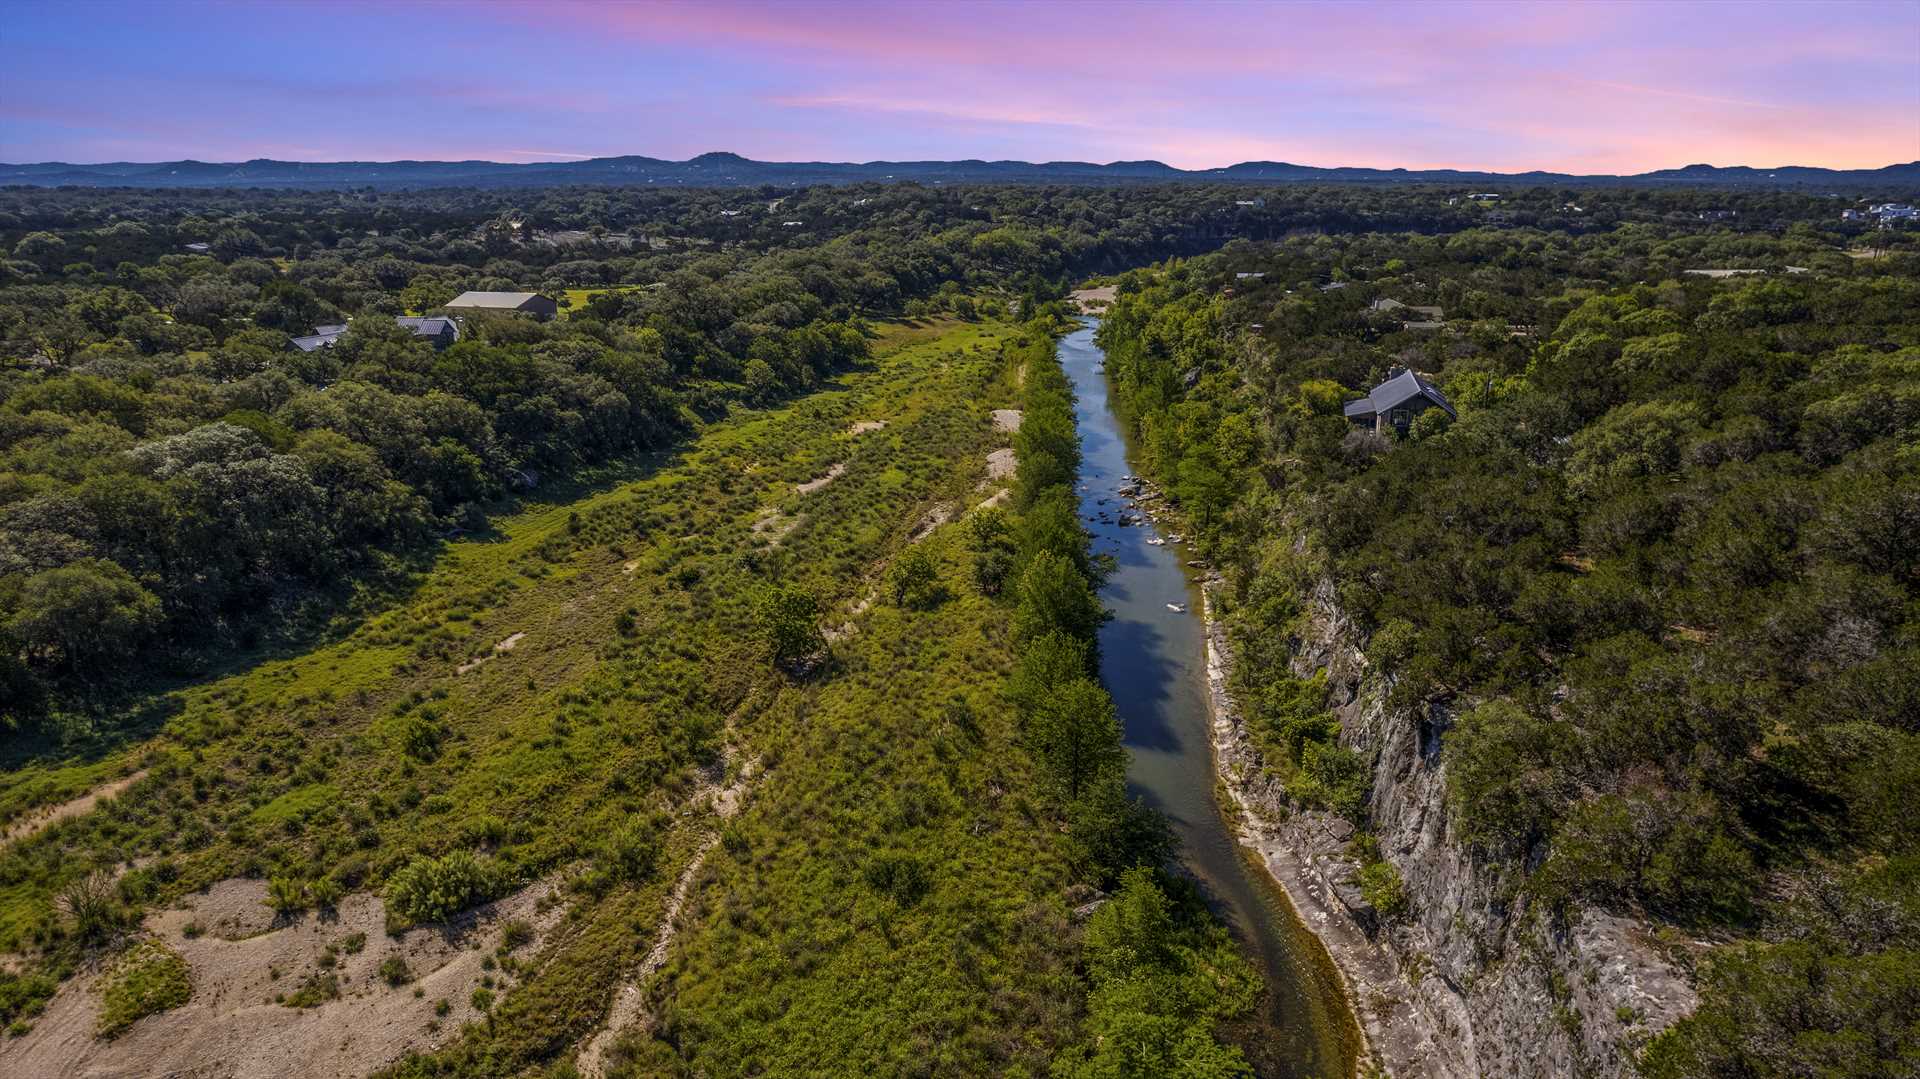                                                 The River Bluff Retreat offers the Texas Hill Country at its shining finest!